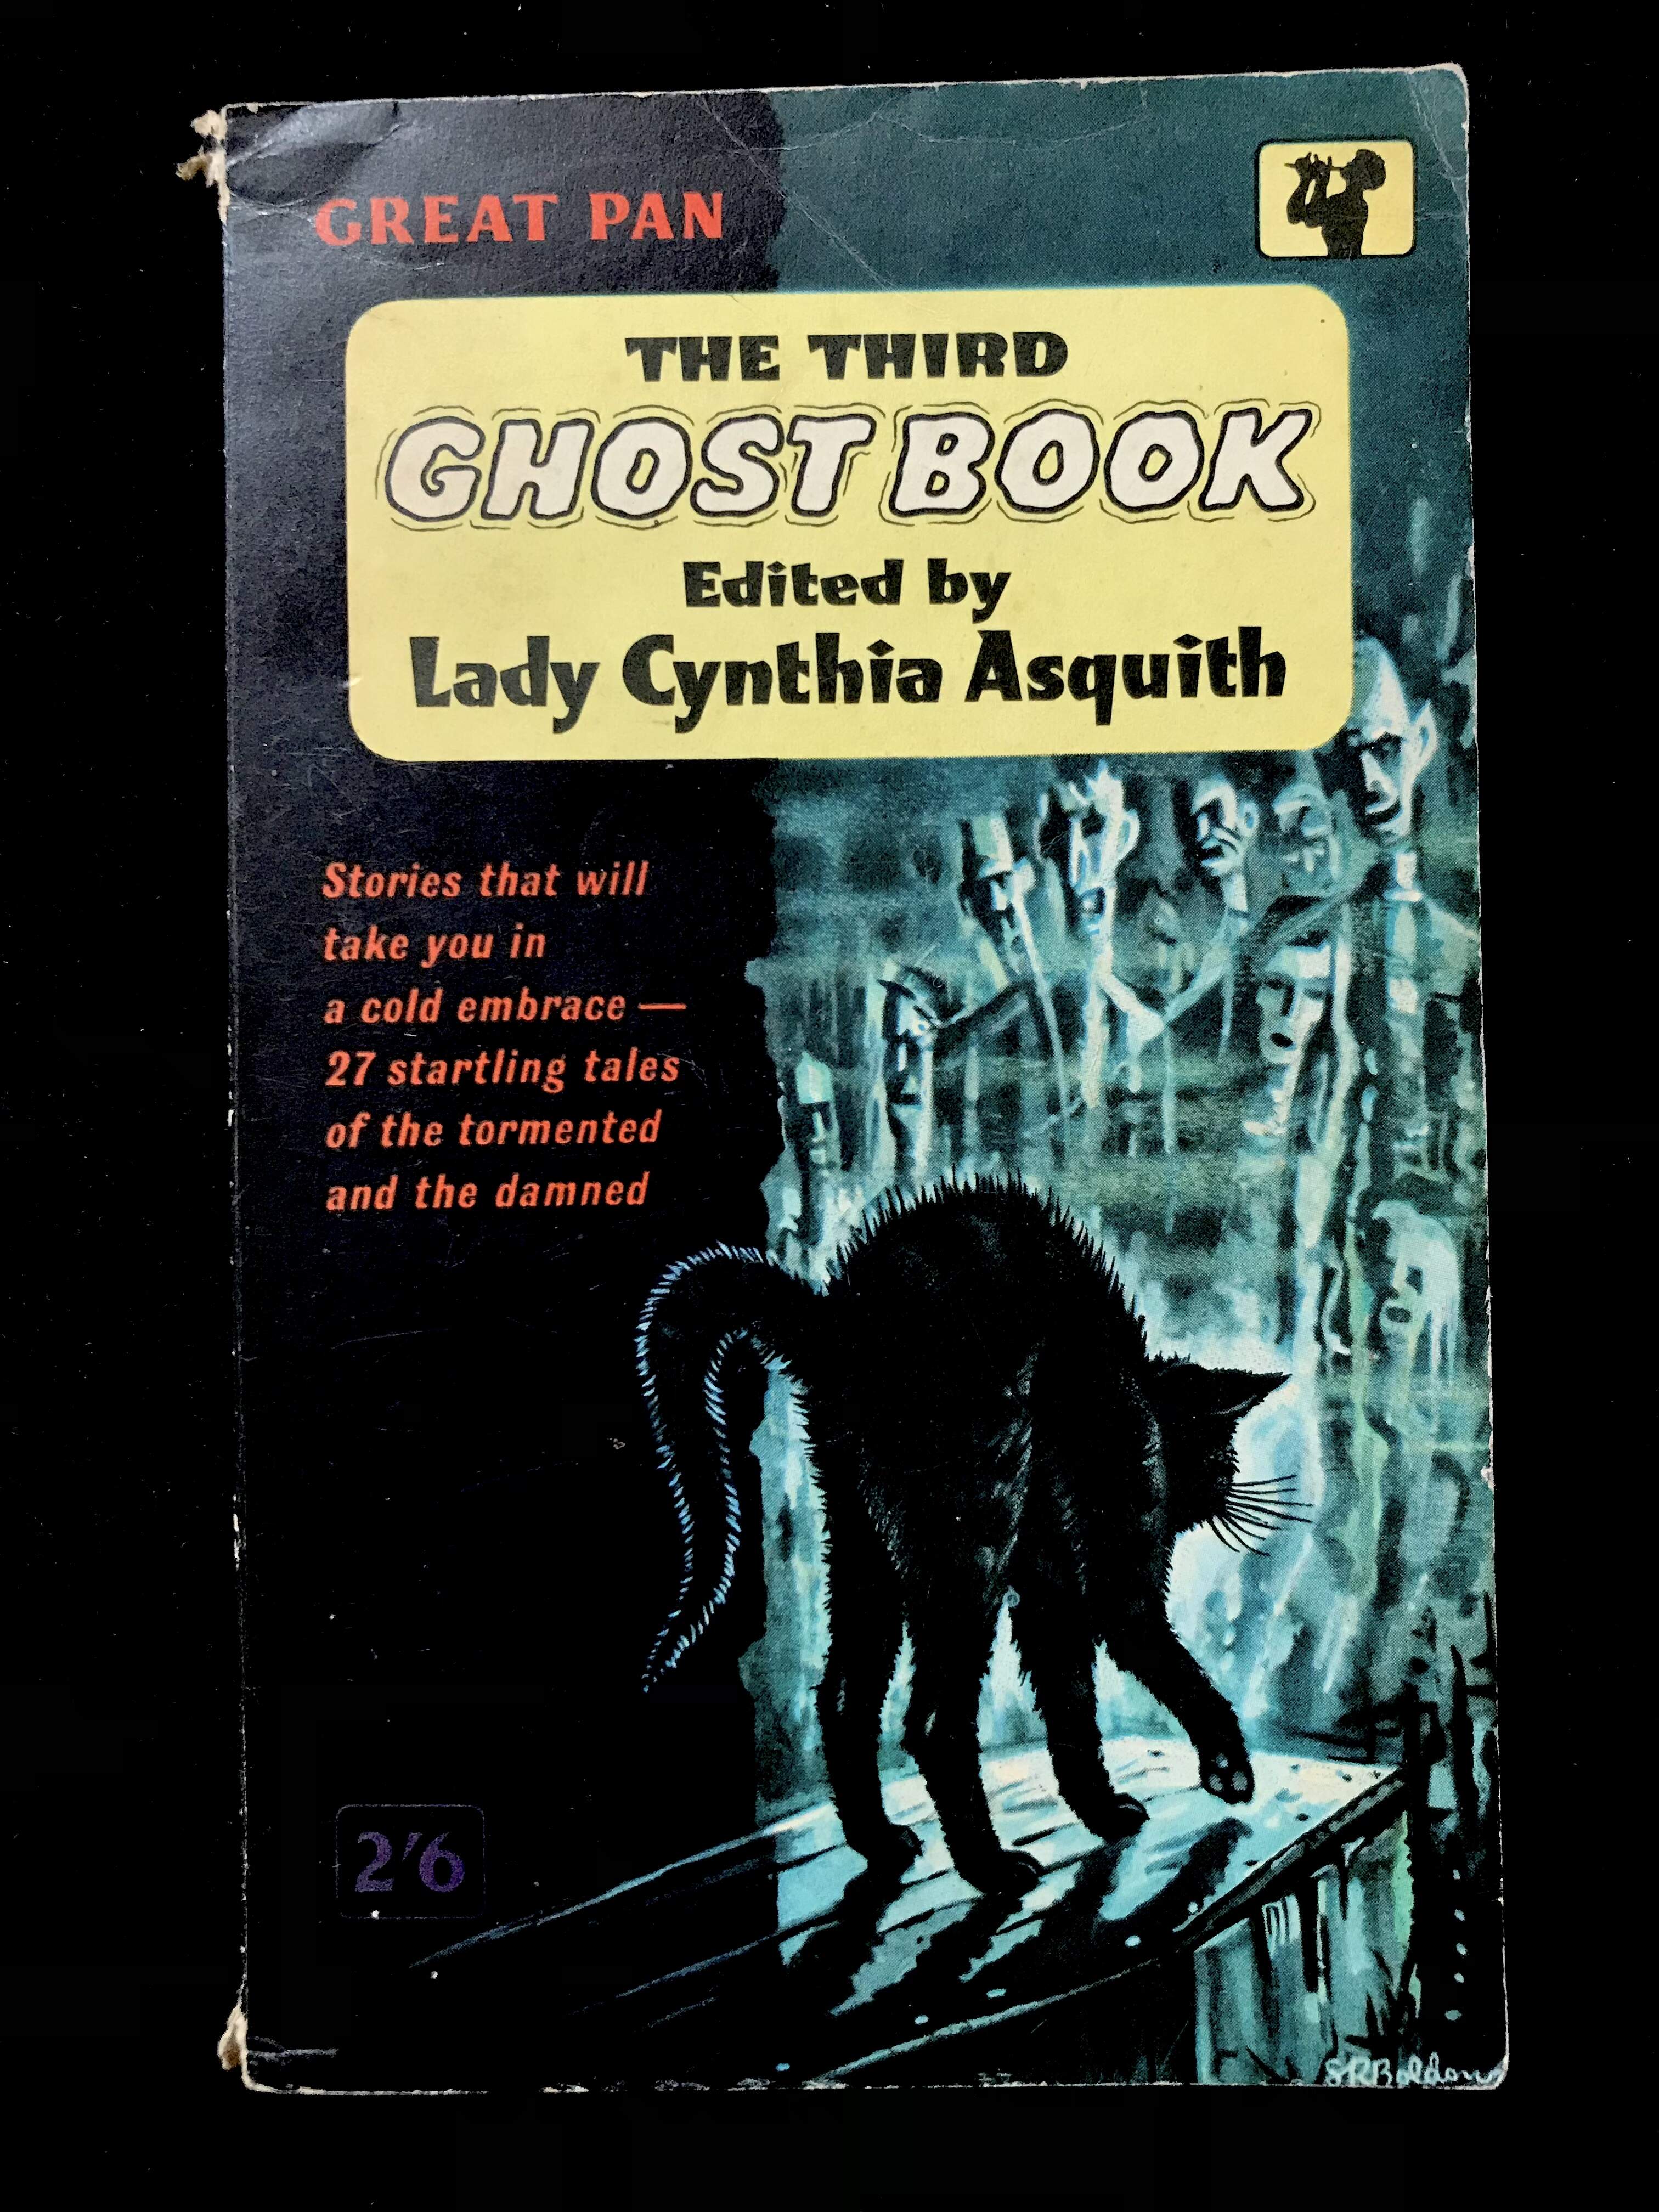 The Third Ghost Book Edited by Lady Cynthia Asquith